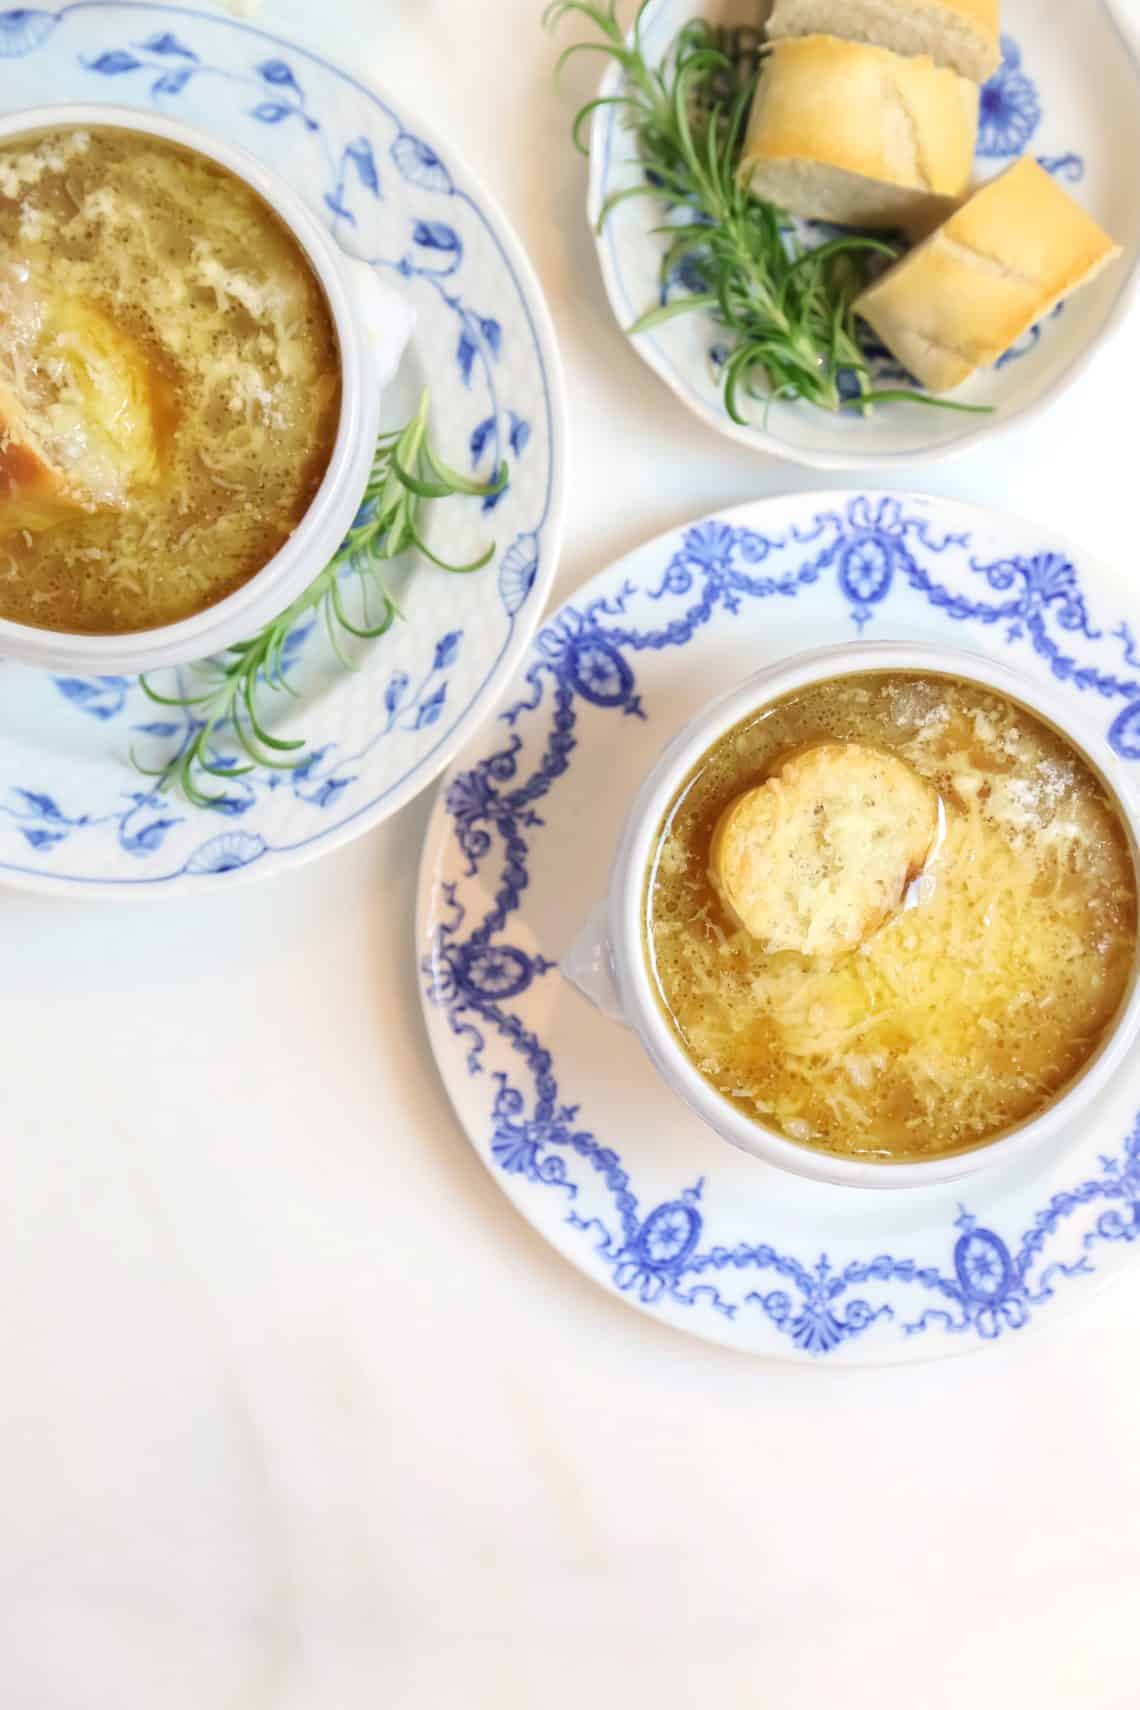 Classic French Onion Soup #ForTheFeast #French